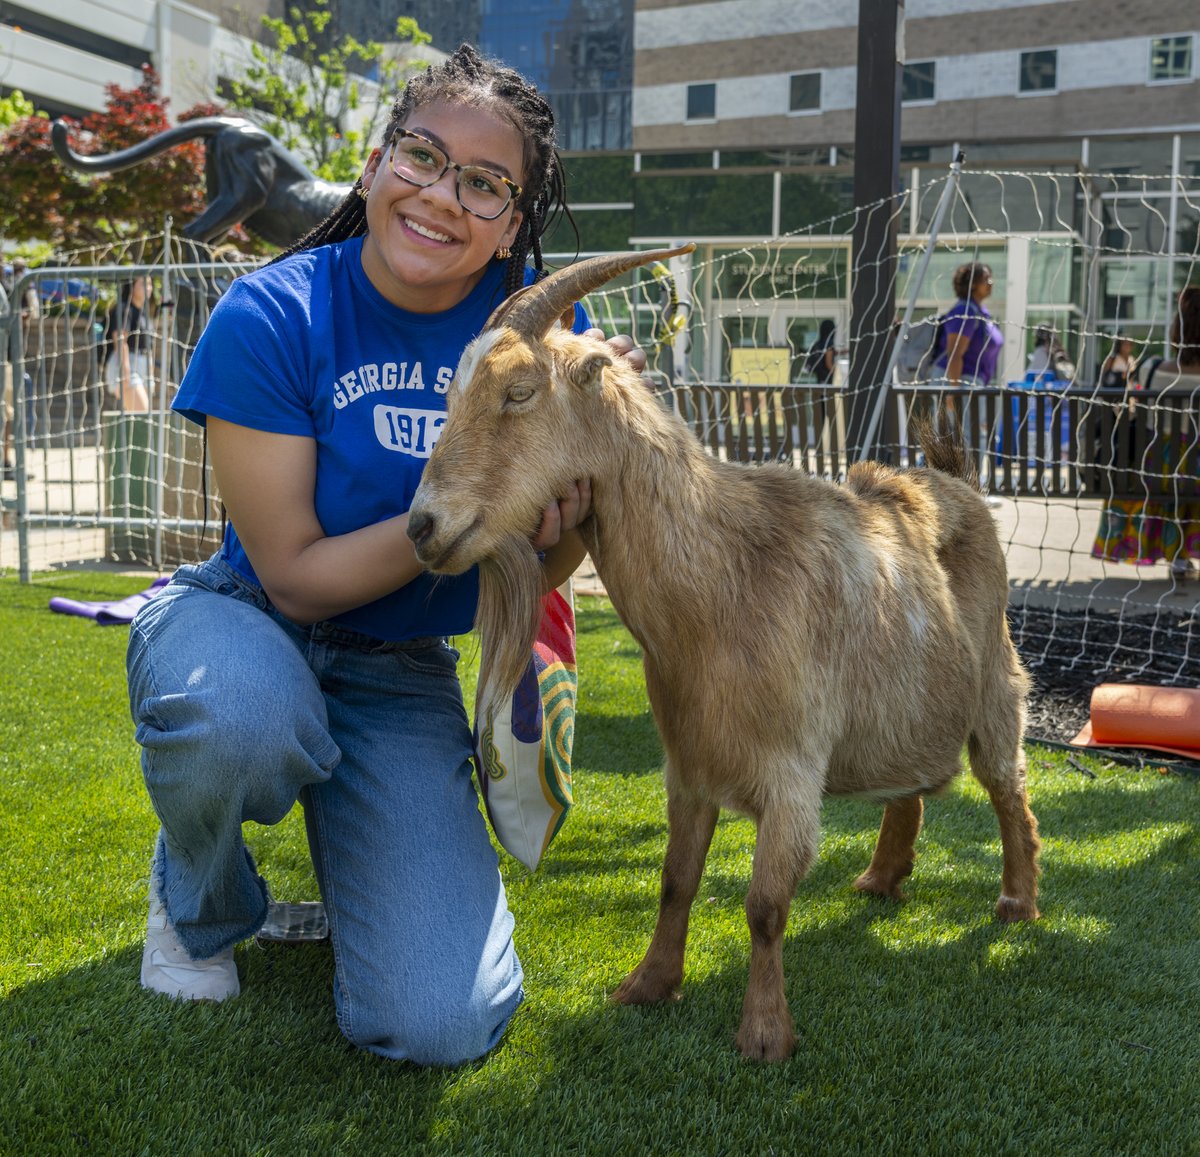 Nothing like celebrating Earth Day with some animal friends! Thanks to Red Wagon Goats for reducing our stress during this finals seasons and getting us outdoors. #StressFreeFriday #FinalsSzn #TheStateWay